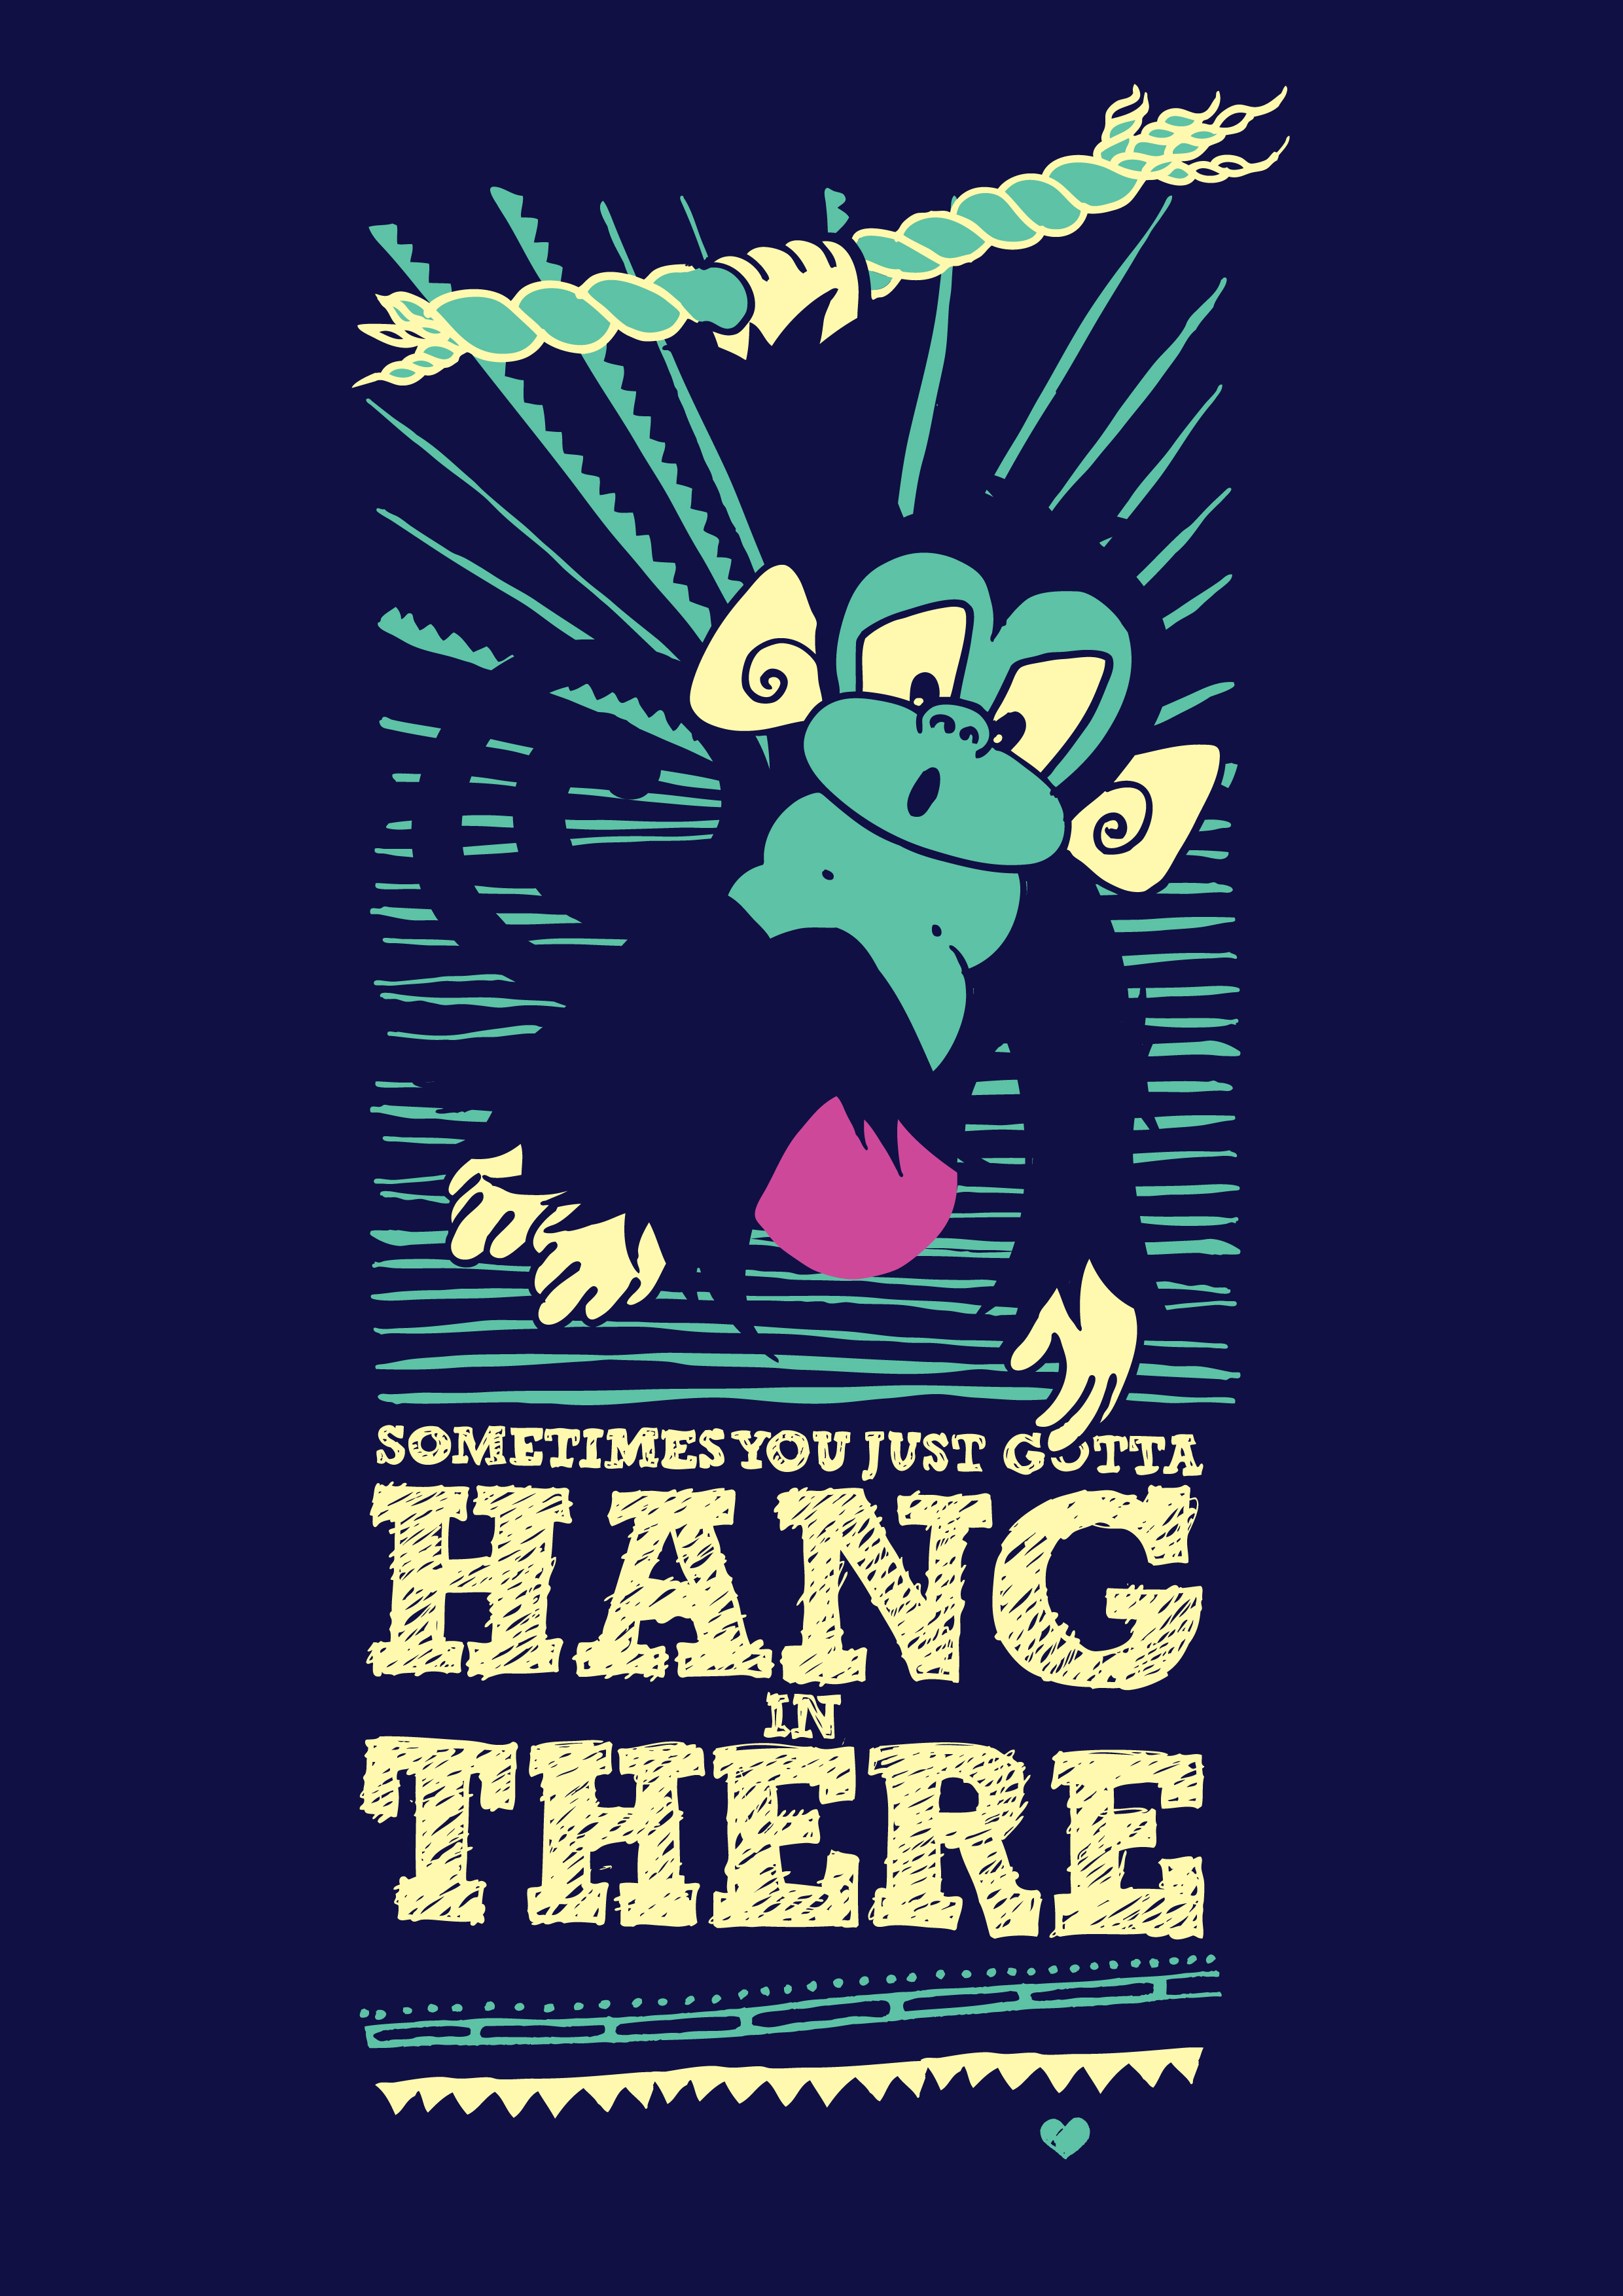 Hang in there - WiseSOVA